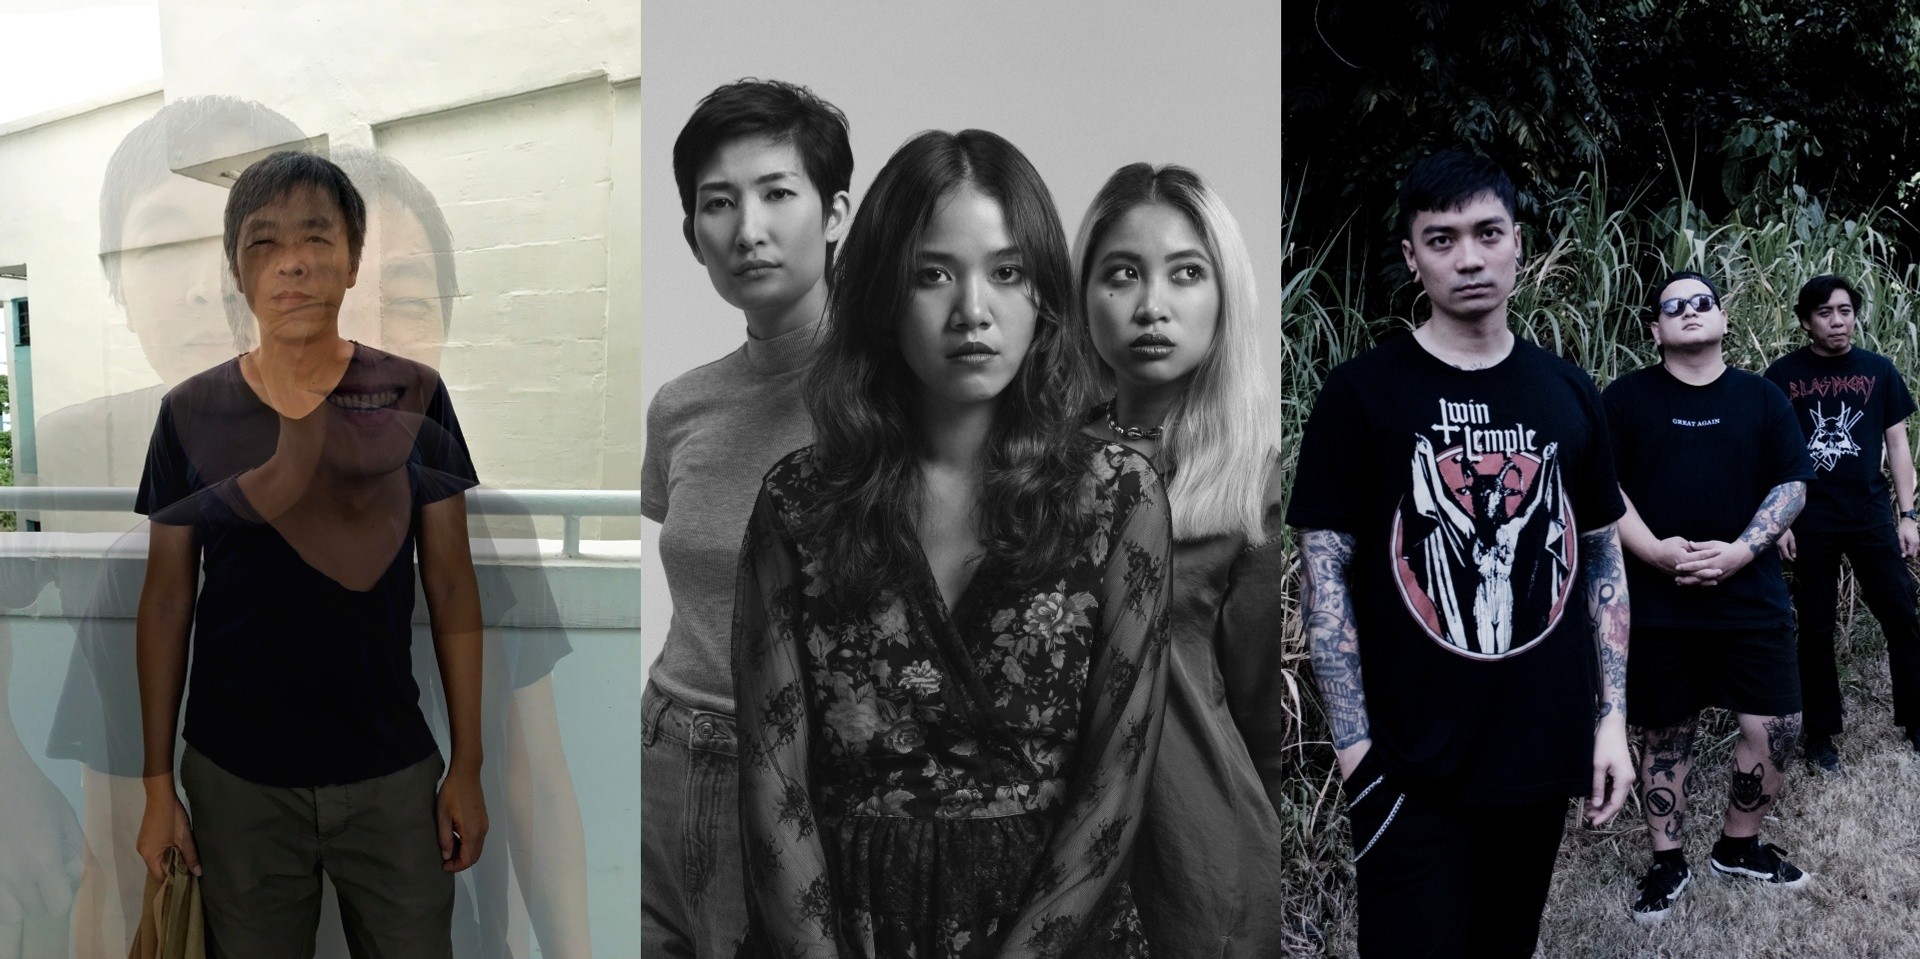 Leslie Low, Yellow Fang, Blood Pact and more to play Rocking the Region 2019